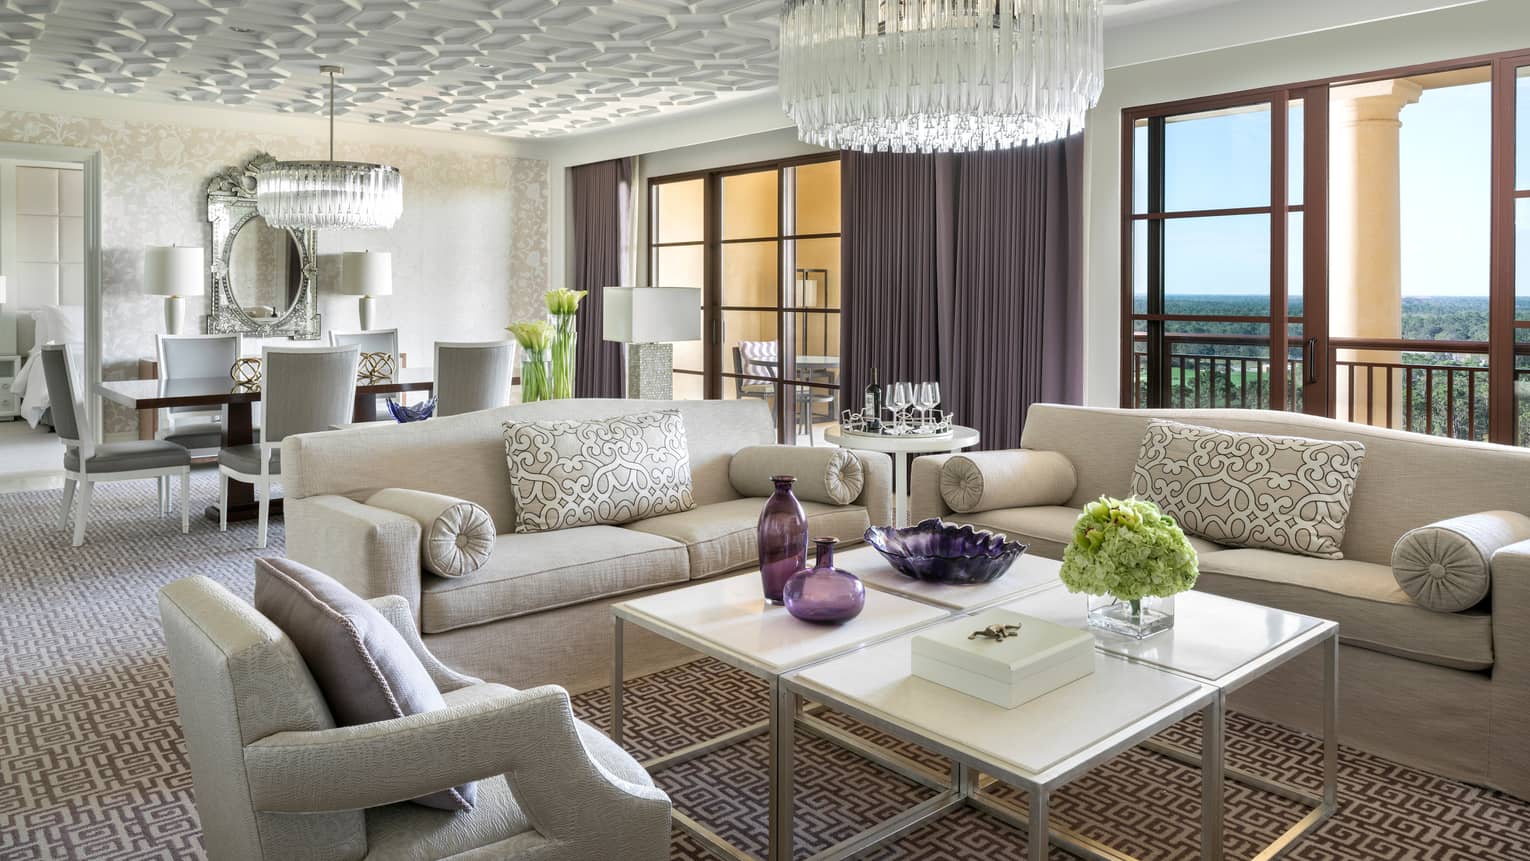 Grand Suite white sofas, armchair around coffee table with purple vases under crystal chandelier, sunny windows